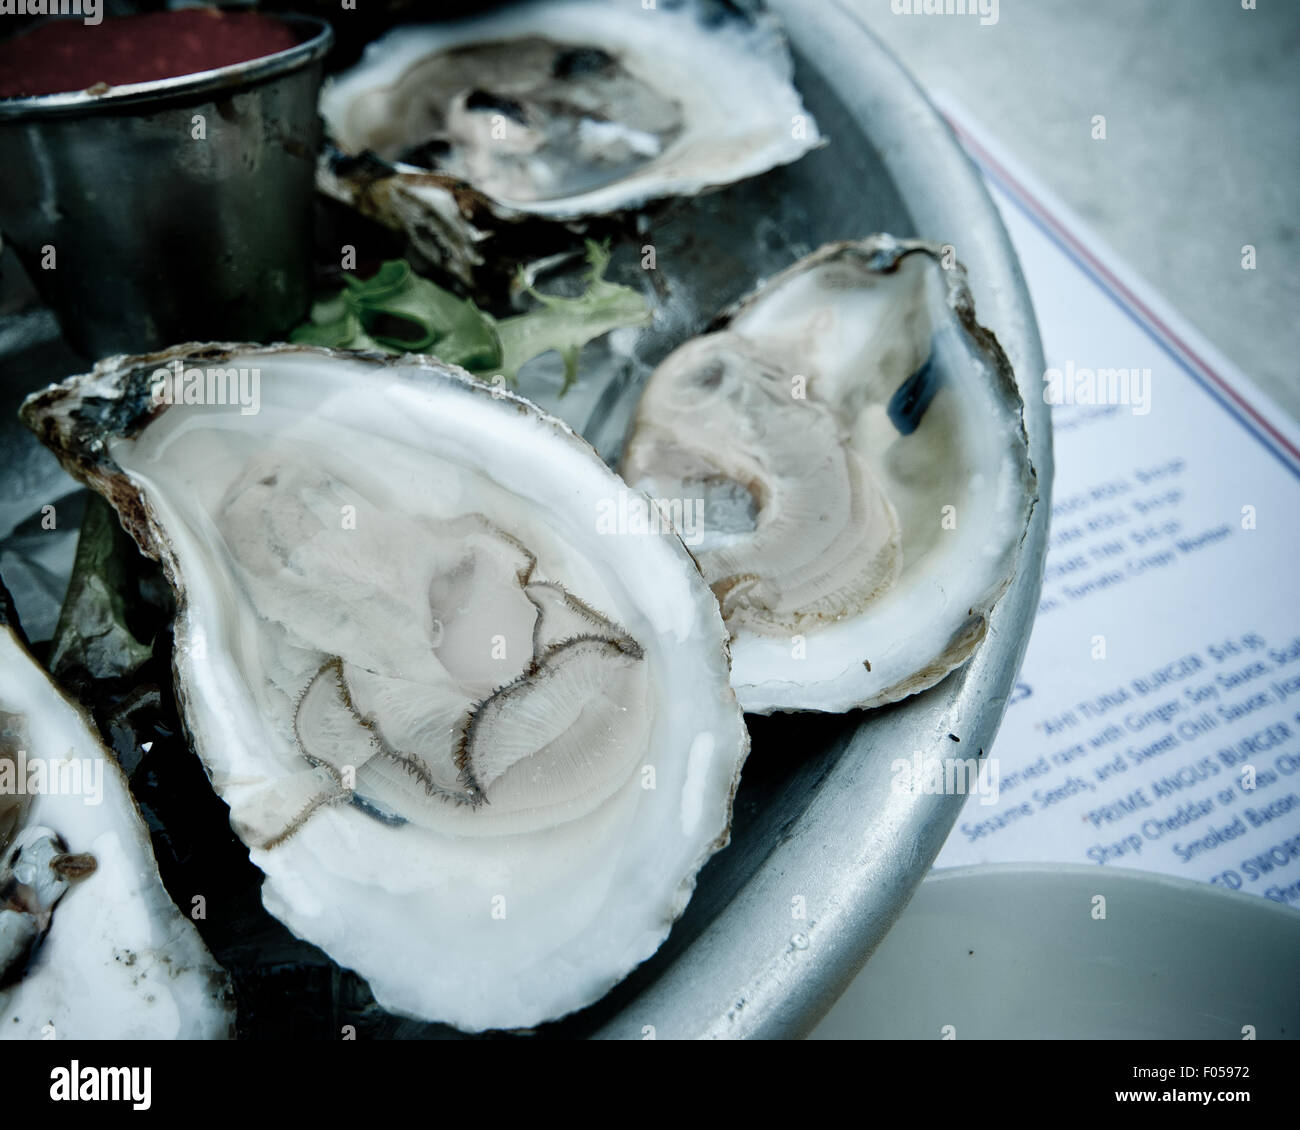 Oyster on a half shell. Stock Photo